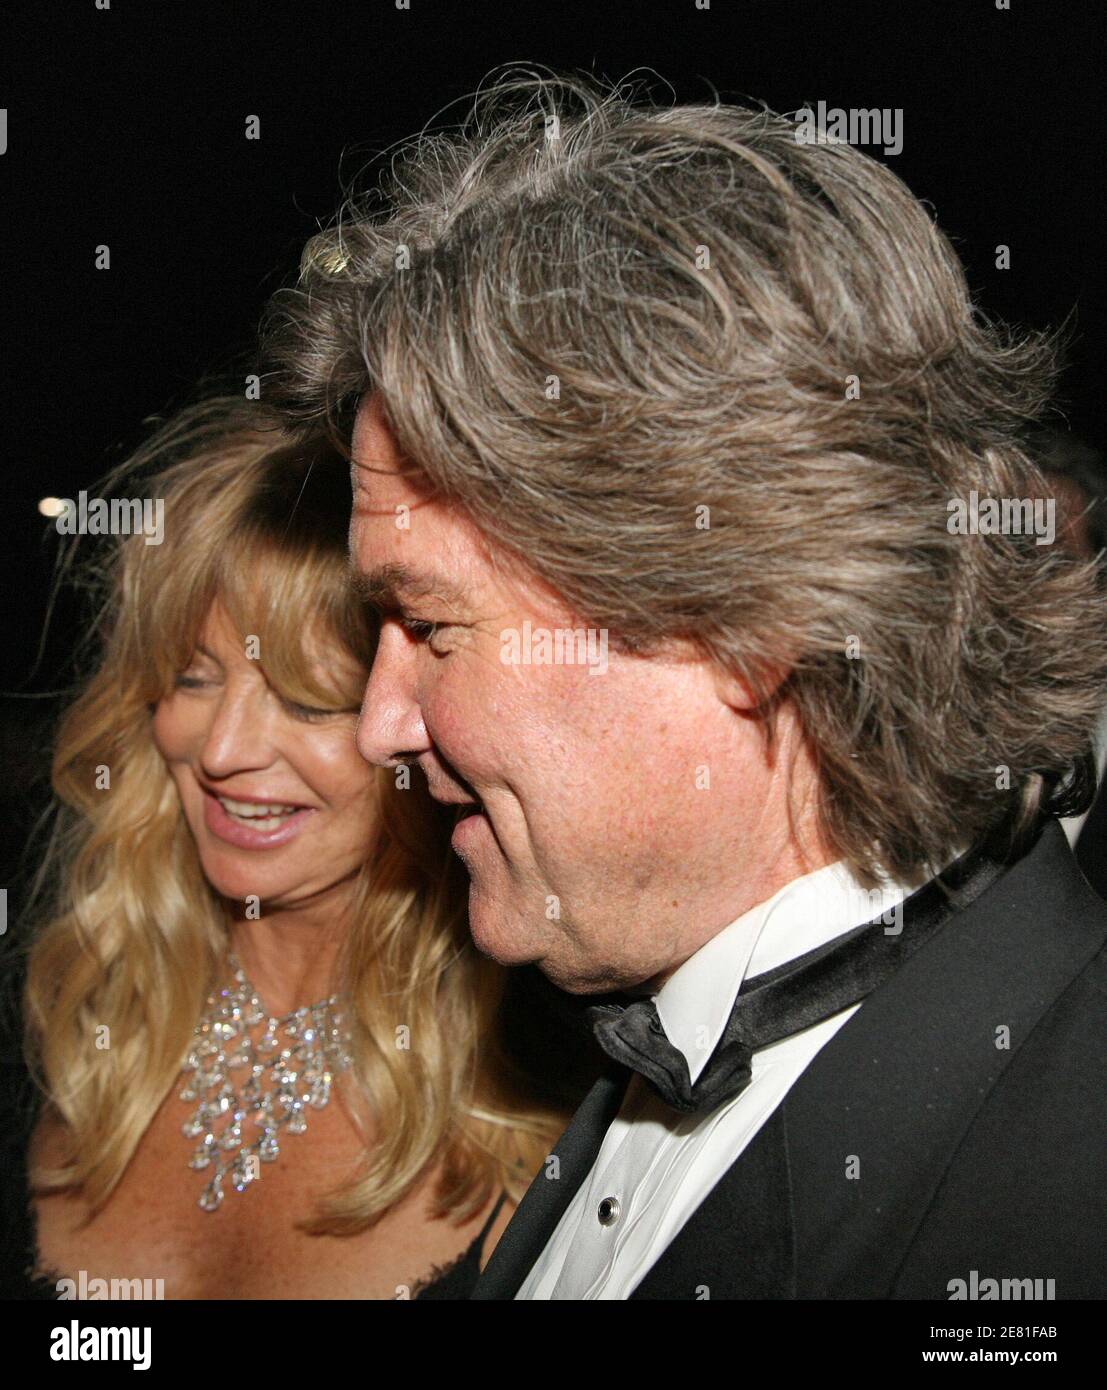 US actress Goldie Hawn and her husband actor Kurt Russell attend the 'Death Proof' After Party held at the VIP Room during the 60th International Film Festival in Cannes, France on May 22, 2007. Photo by Denis Guignebourg/ABACAPRESS.COM Stock Photo